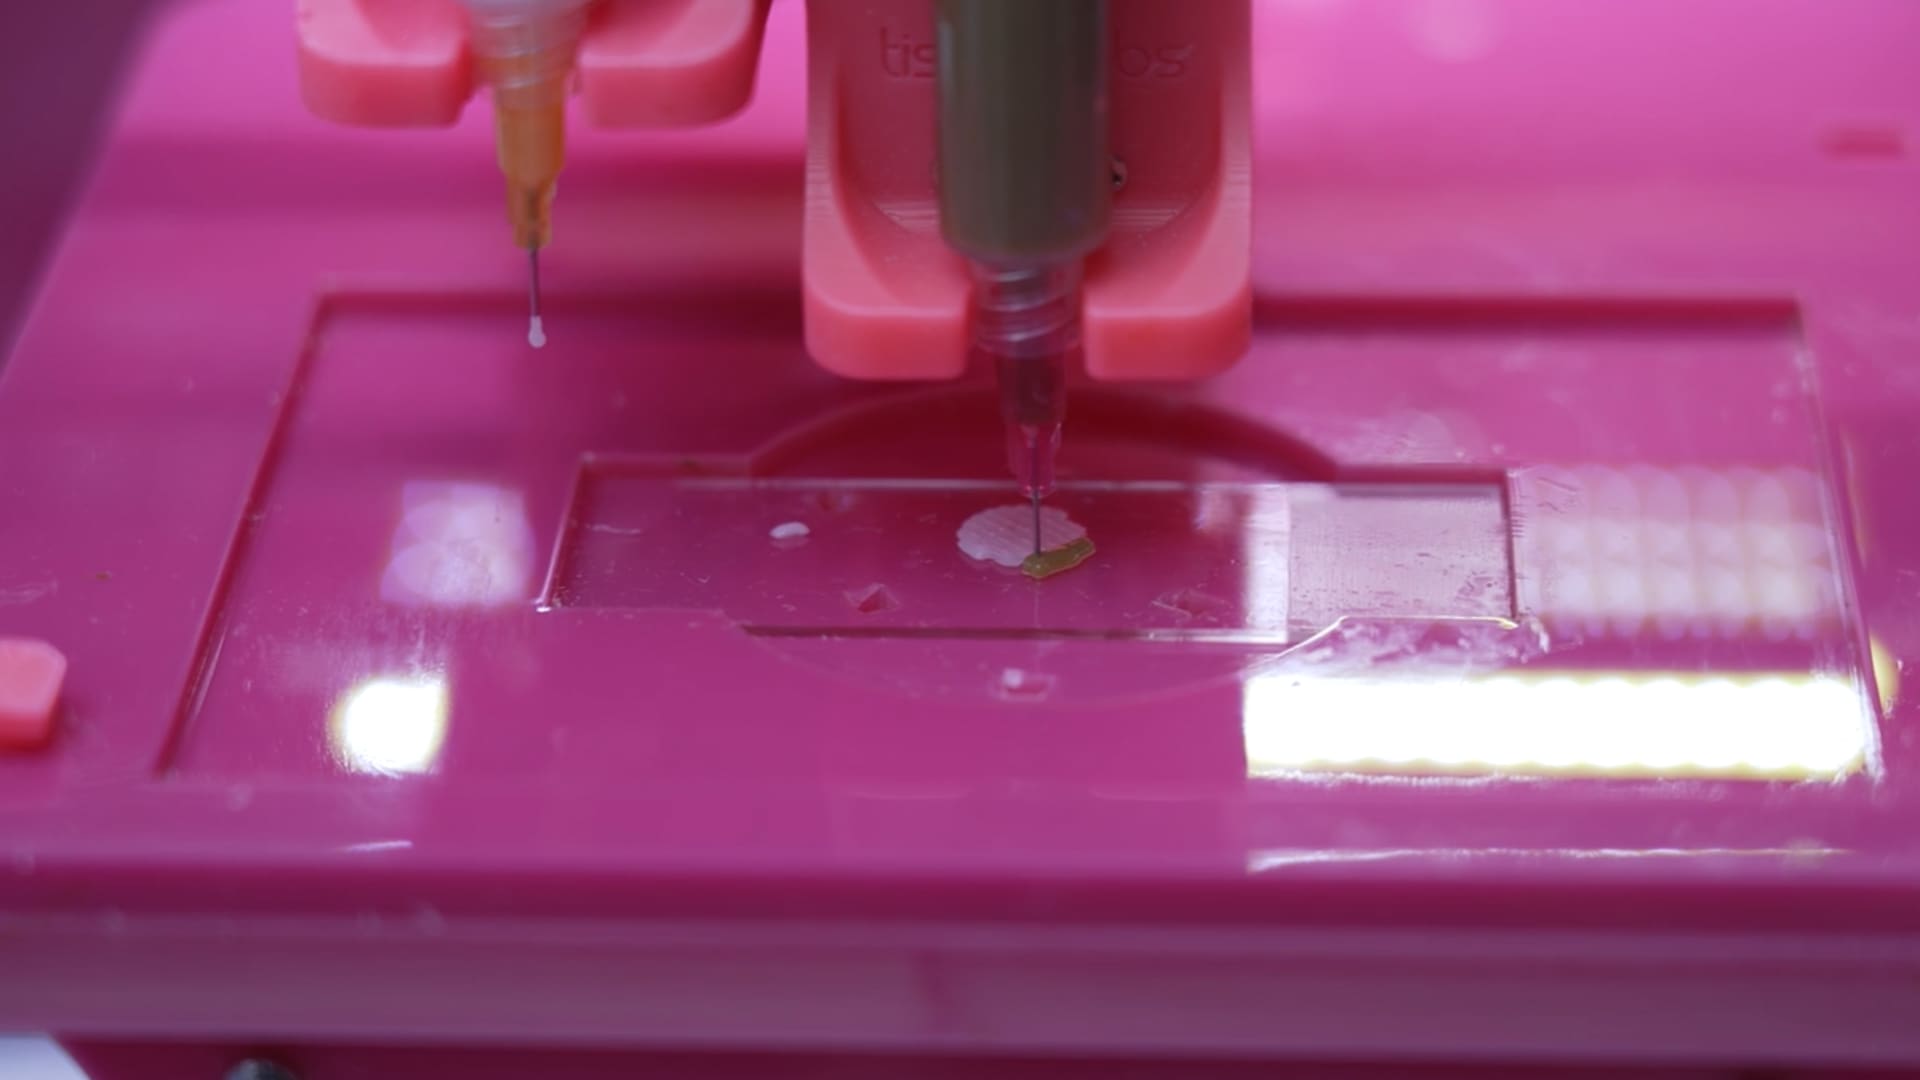 L’Oreal says it's working on a form of bioprinted skin that can ‘feel’